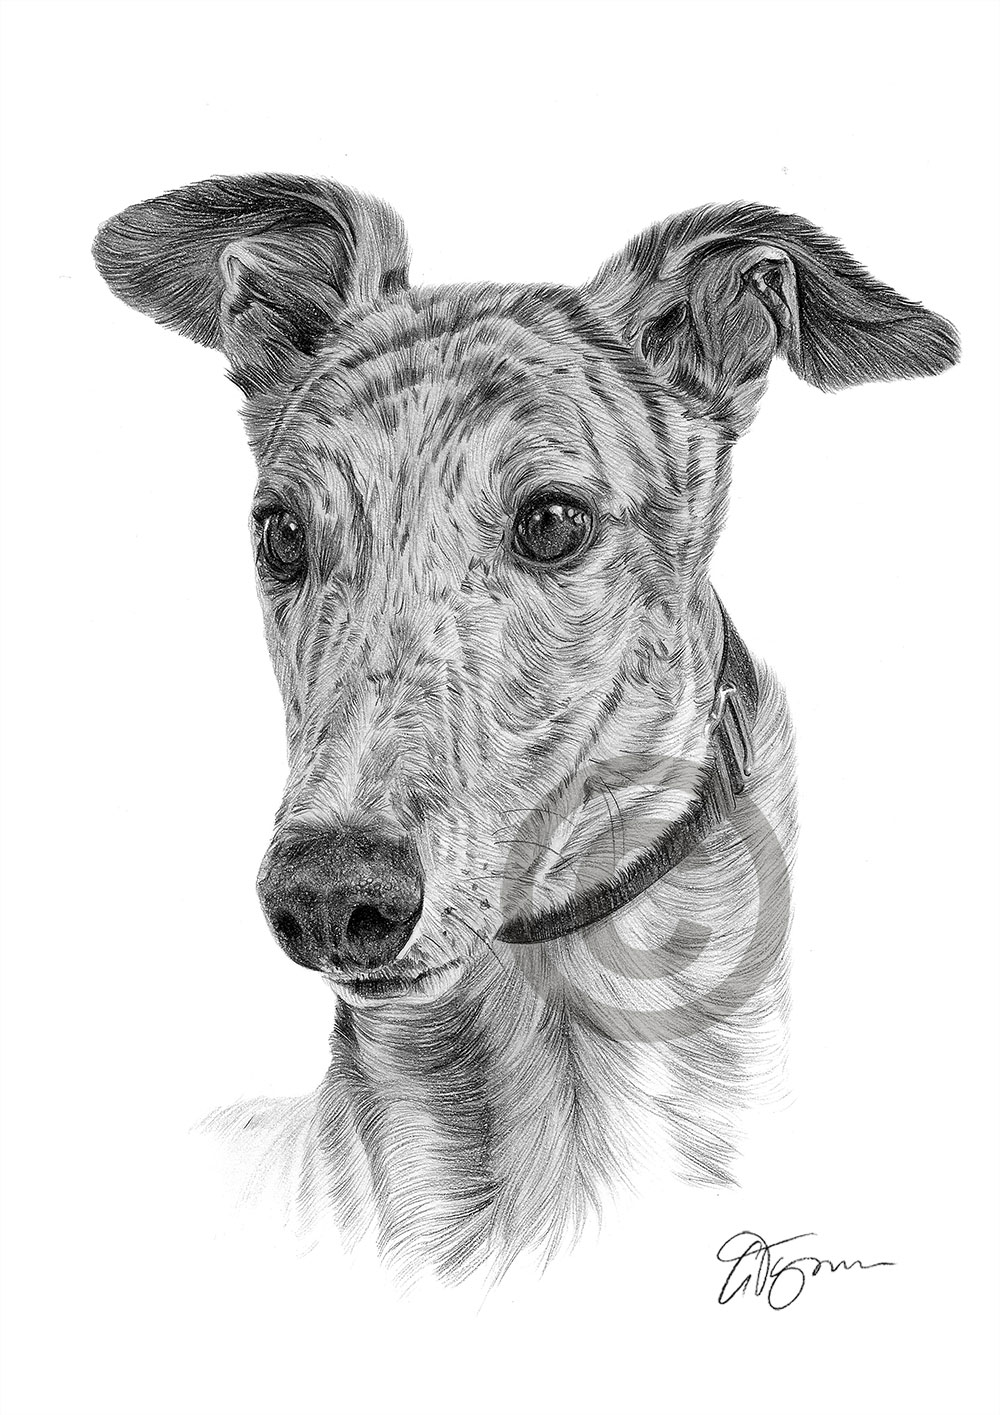 Pencil drawing of an adult Greyhound by artist Gary Tymon